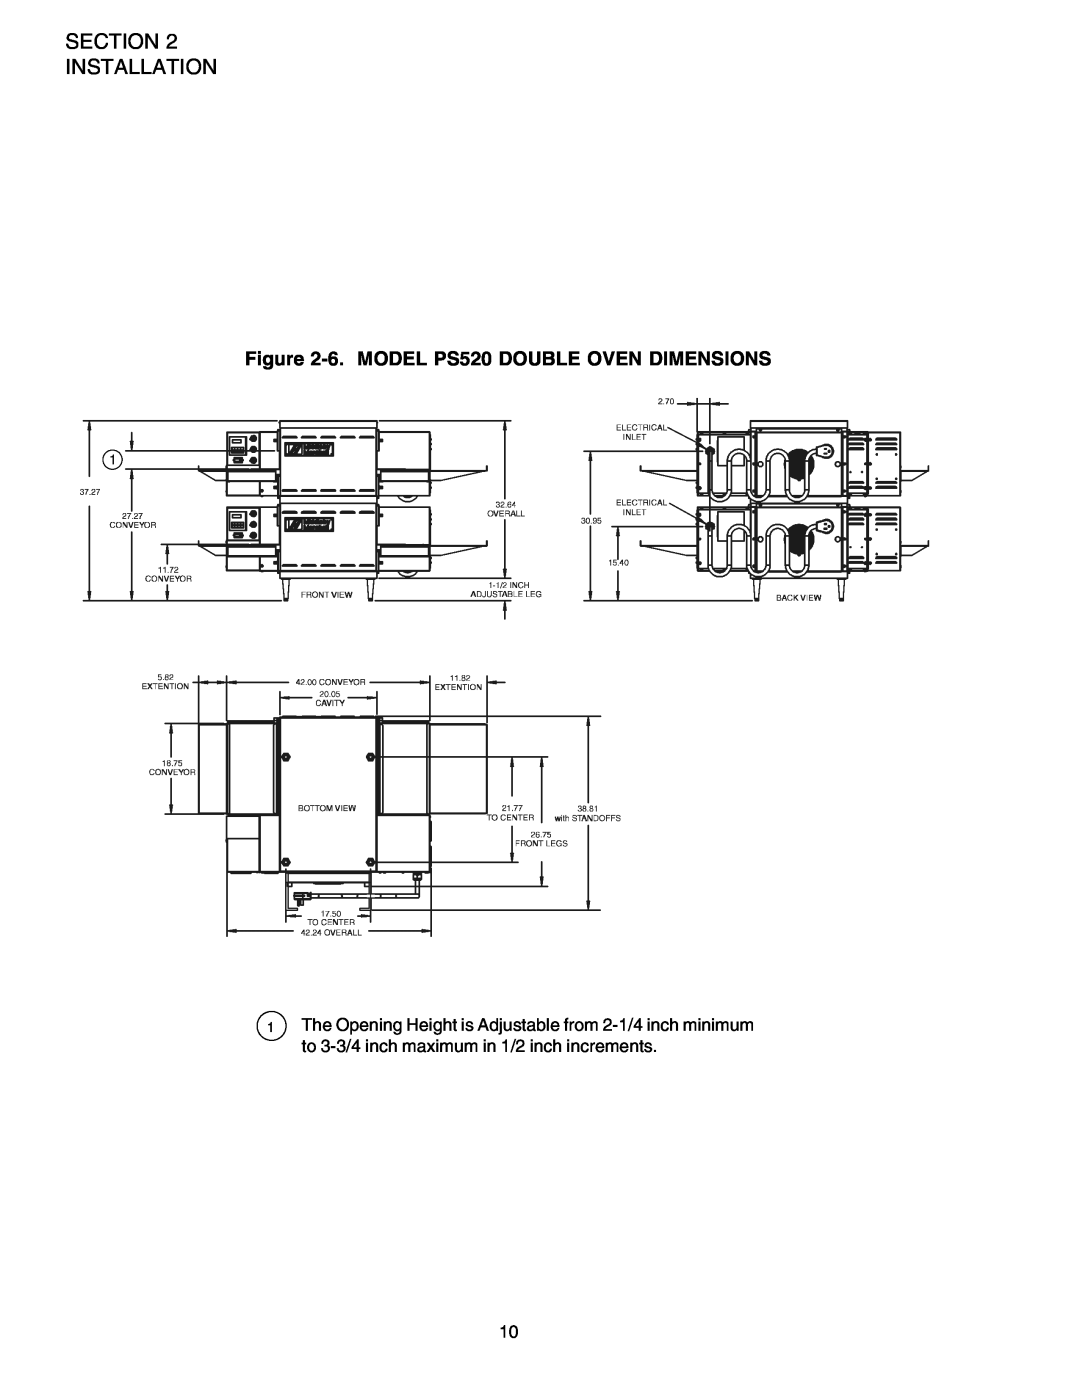 Middleby Marshall installation manual Section Installation, 6.MODEL PS520 DOUBLE OVEN DIMENSIONS 